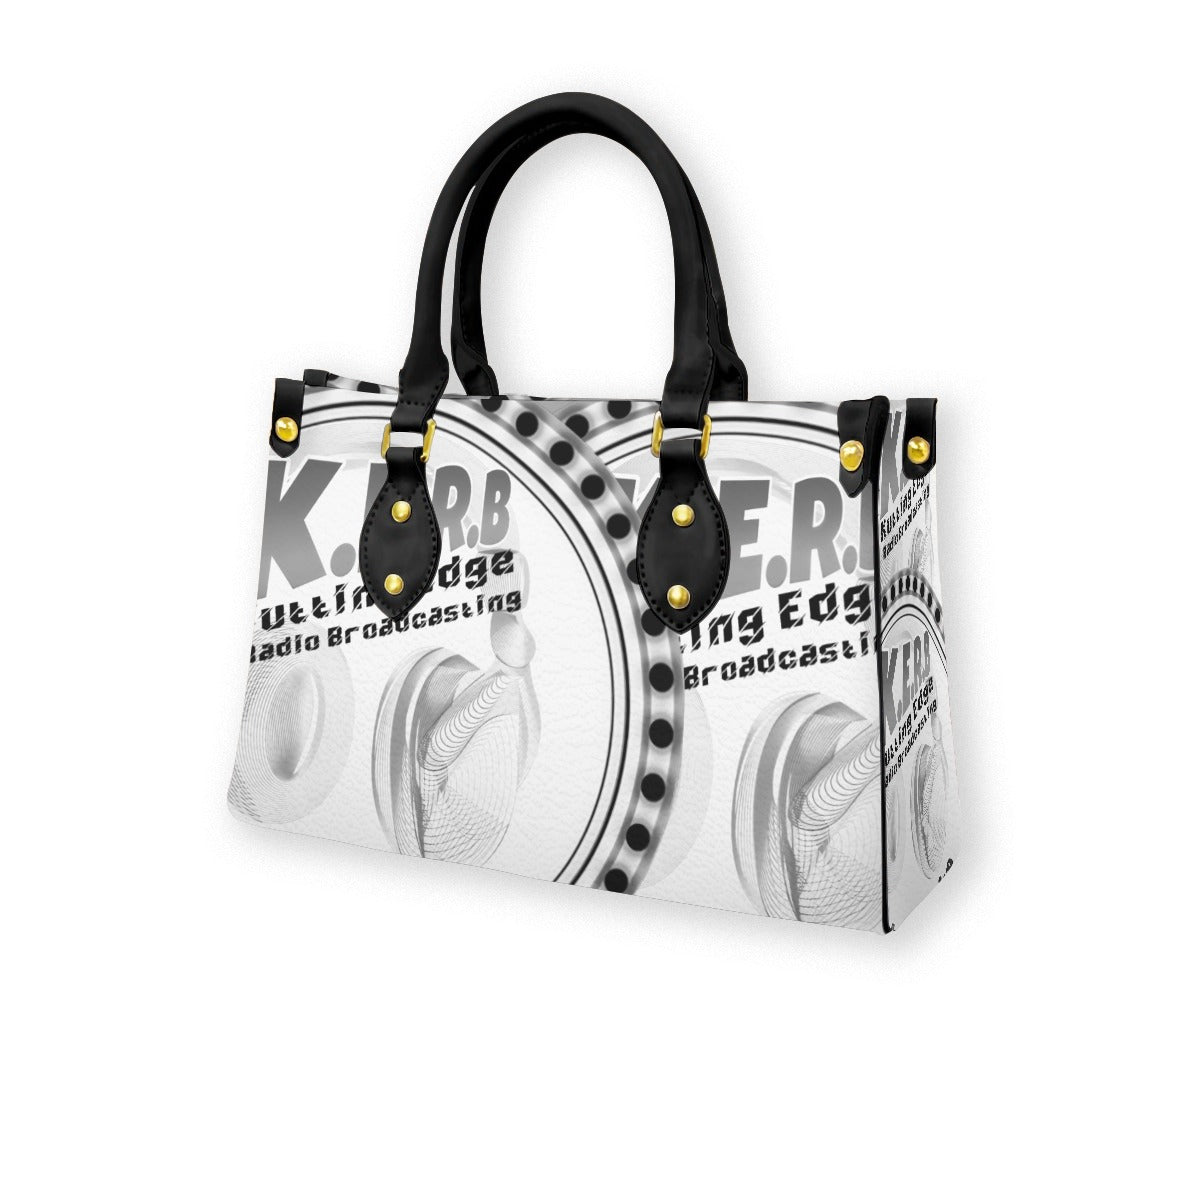 KERB Fade-Out Logo Purse With Black Handle